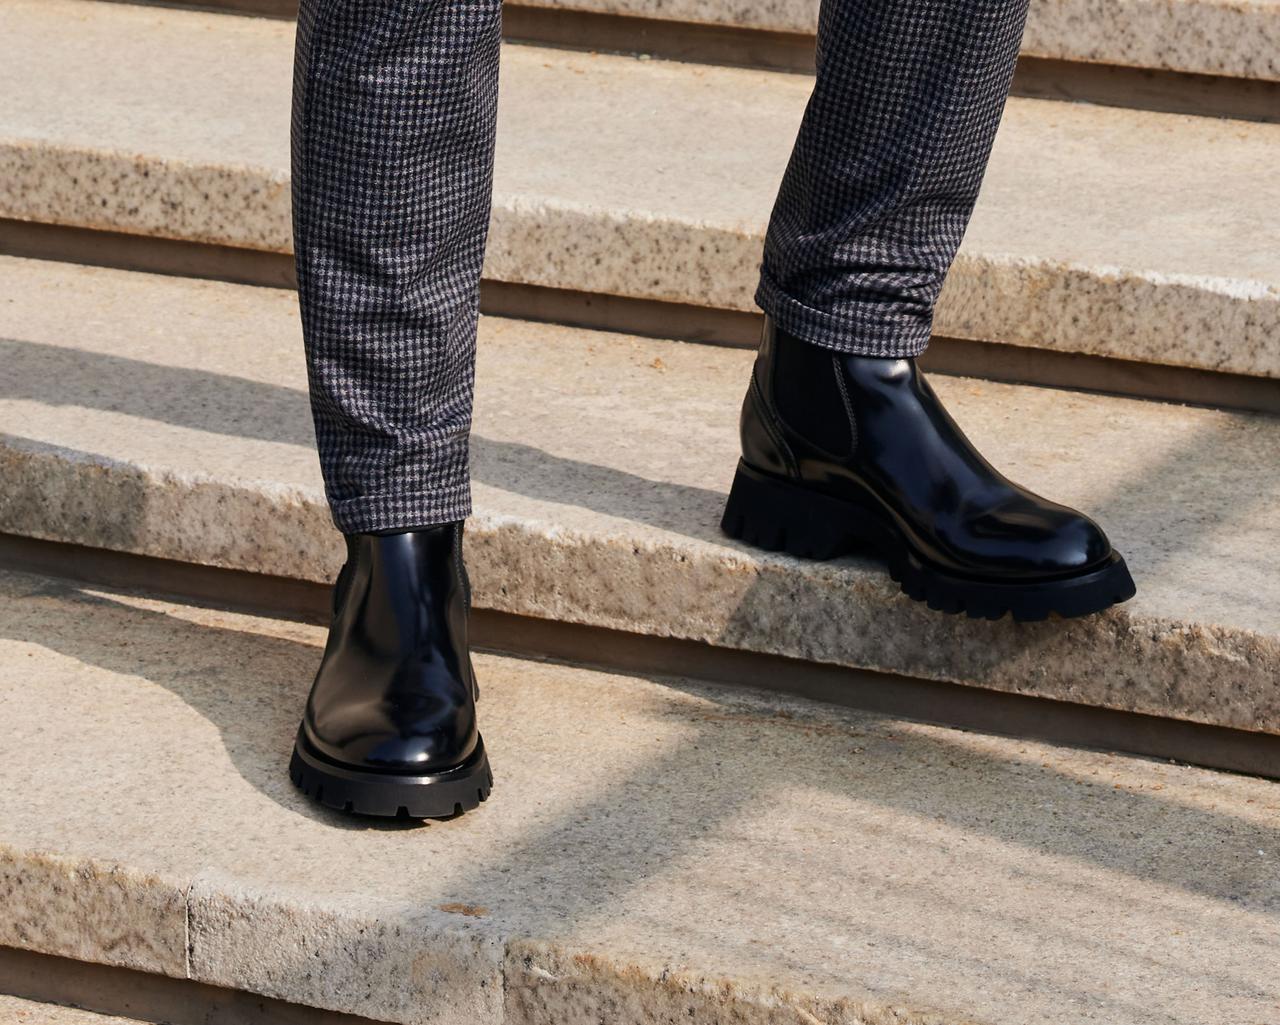 HUGO BOSS  BOSS Guide: How to Match Suits with Shoes